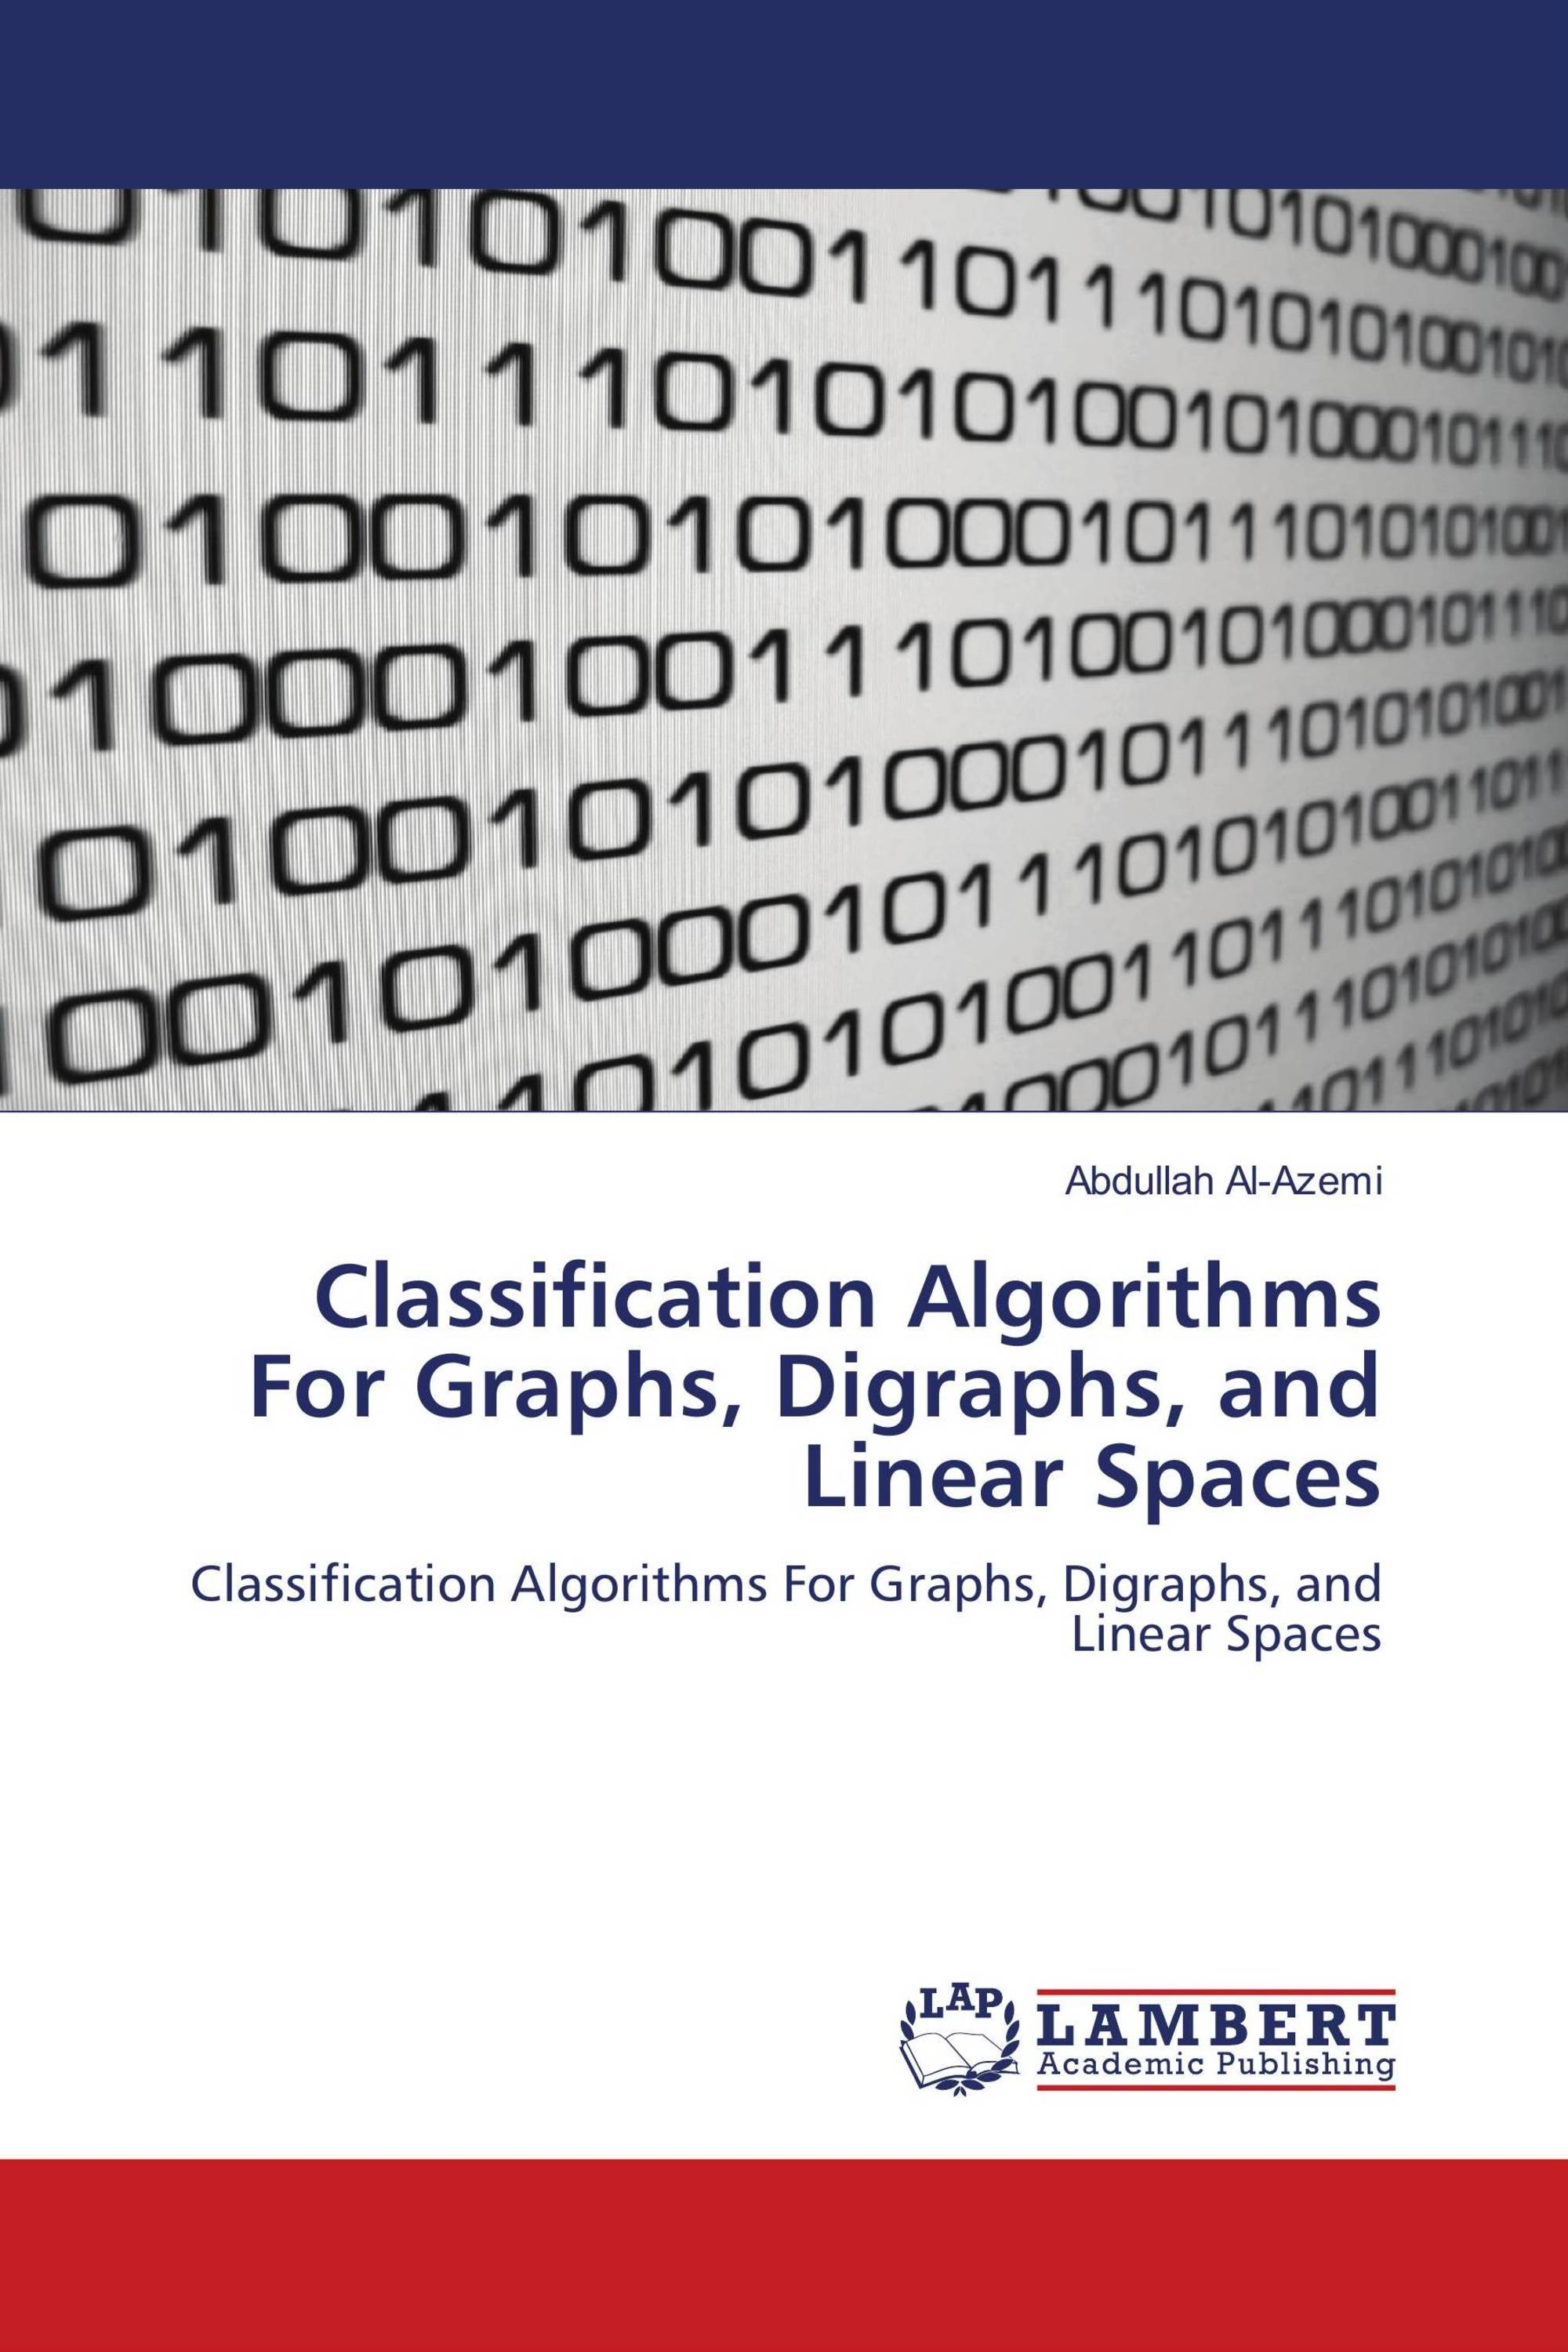 Classification Algorithms For Graphs, Digraphs, and Linear Spaces